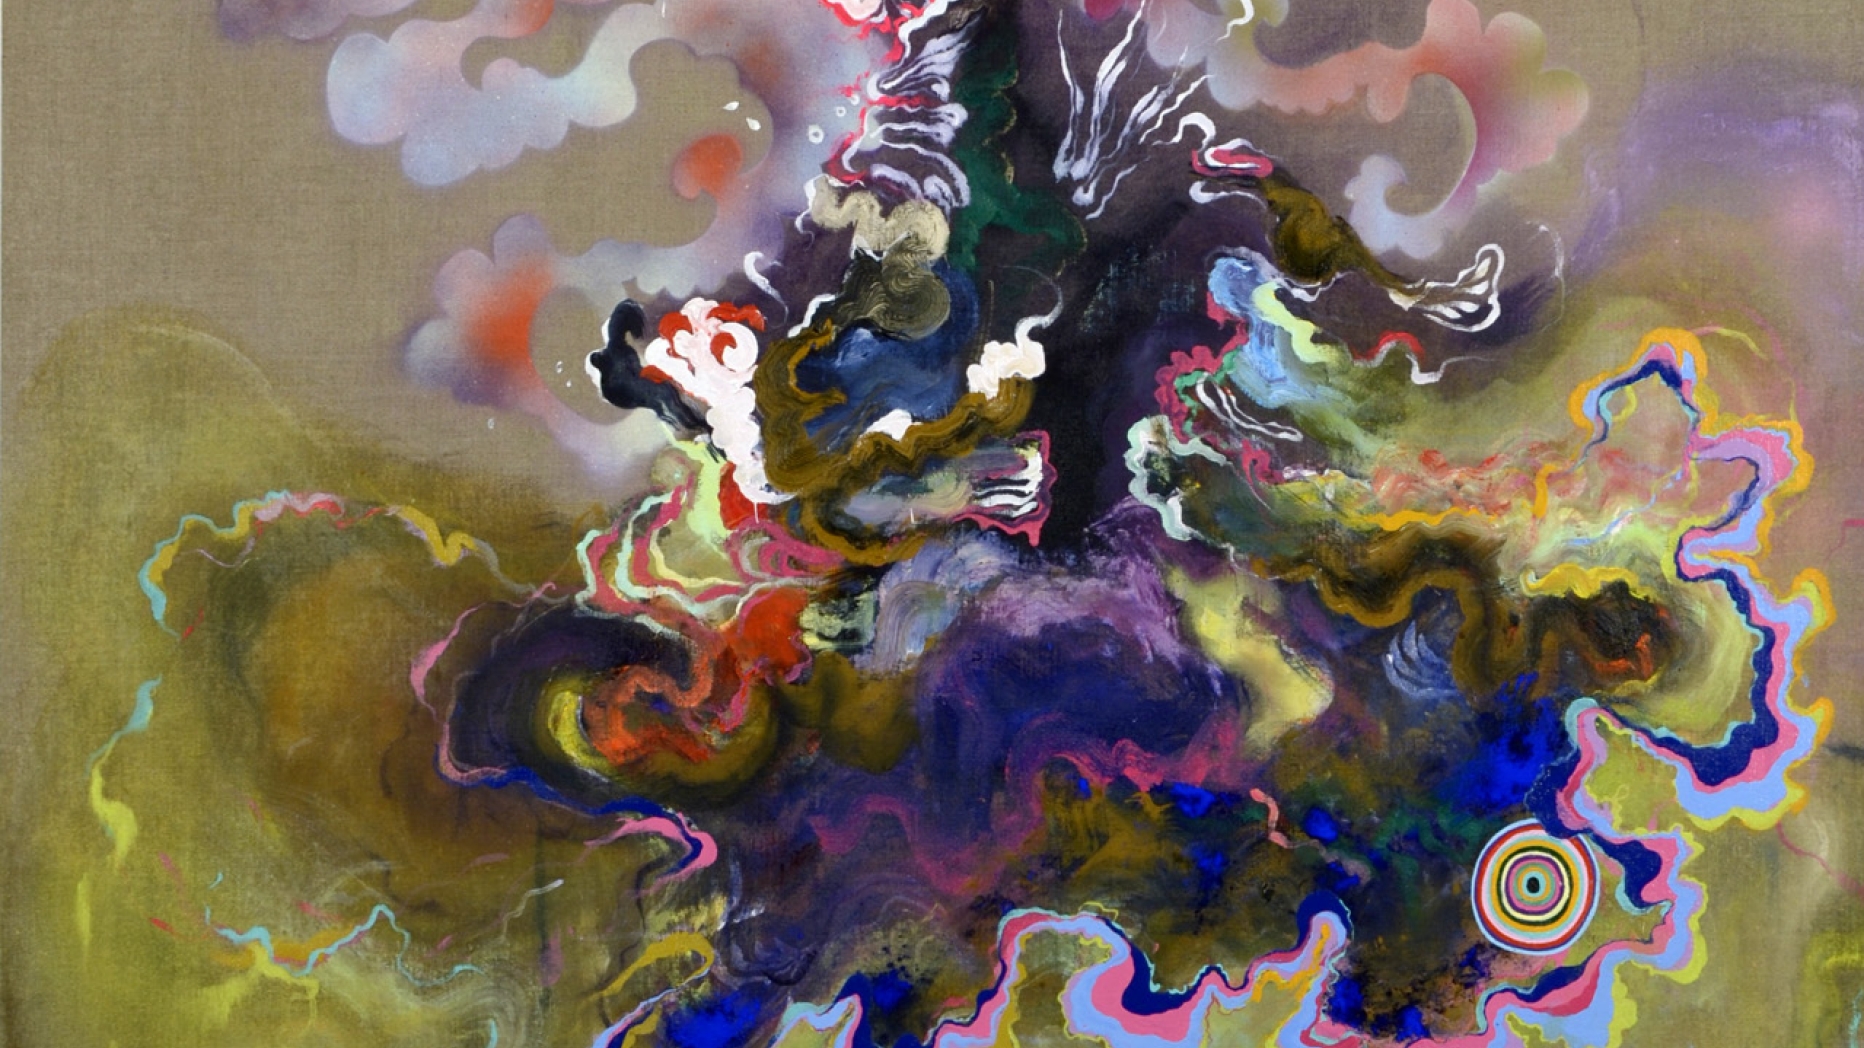 The Service of Clouds, 2014, oil and mixed media on linen, 60" x 48"